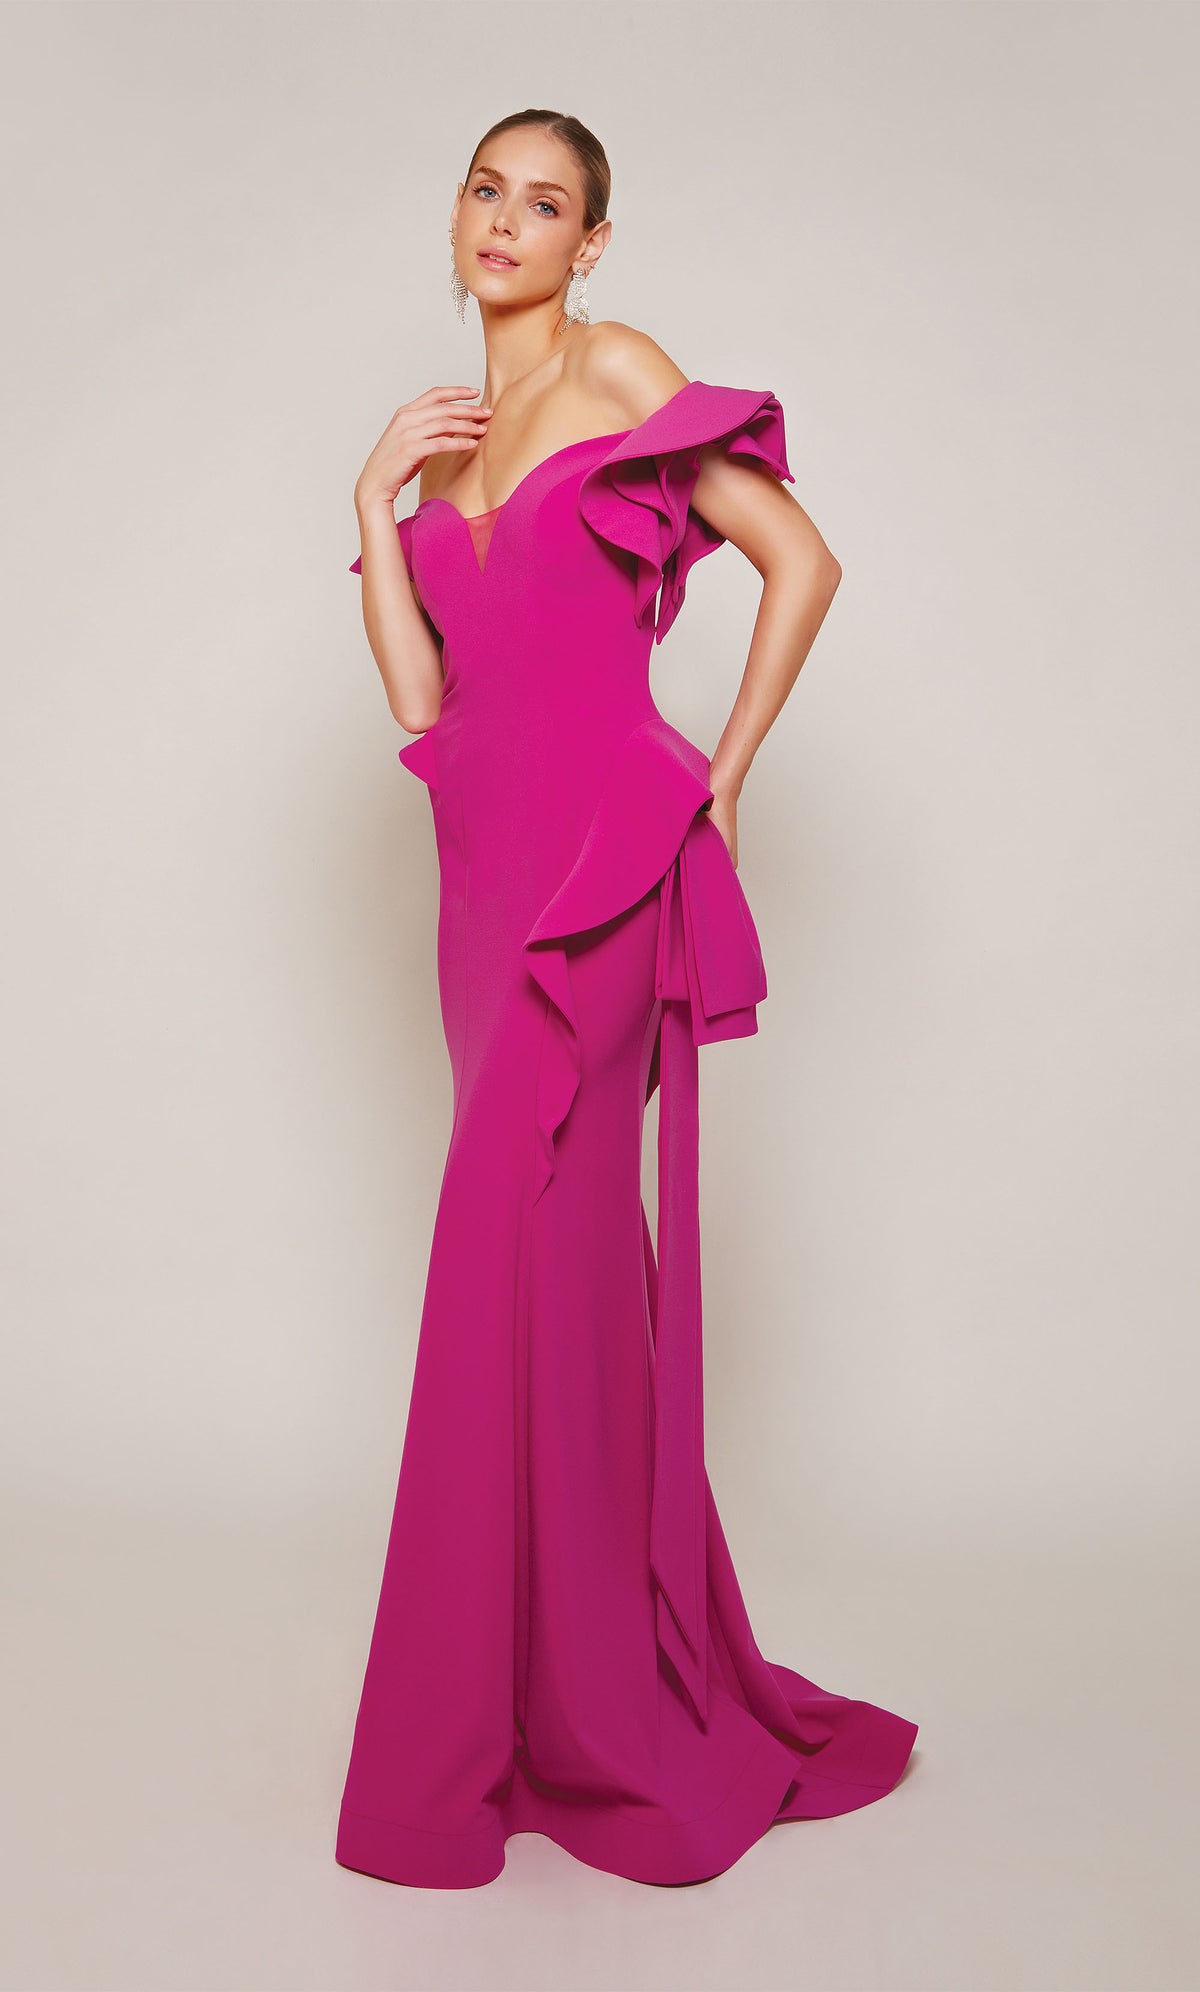 A chic, raspberry pink wedding guest dress boasting an off-the-shoulder neckline, rosette sleeves, and a sheath skirt with cascading ruffles. An excellent choice for a formal evening wedding.